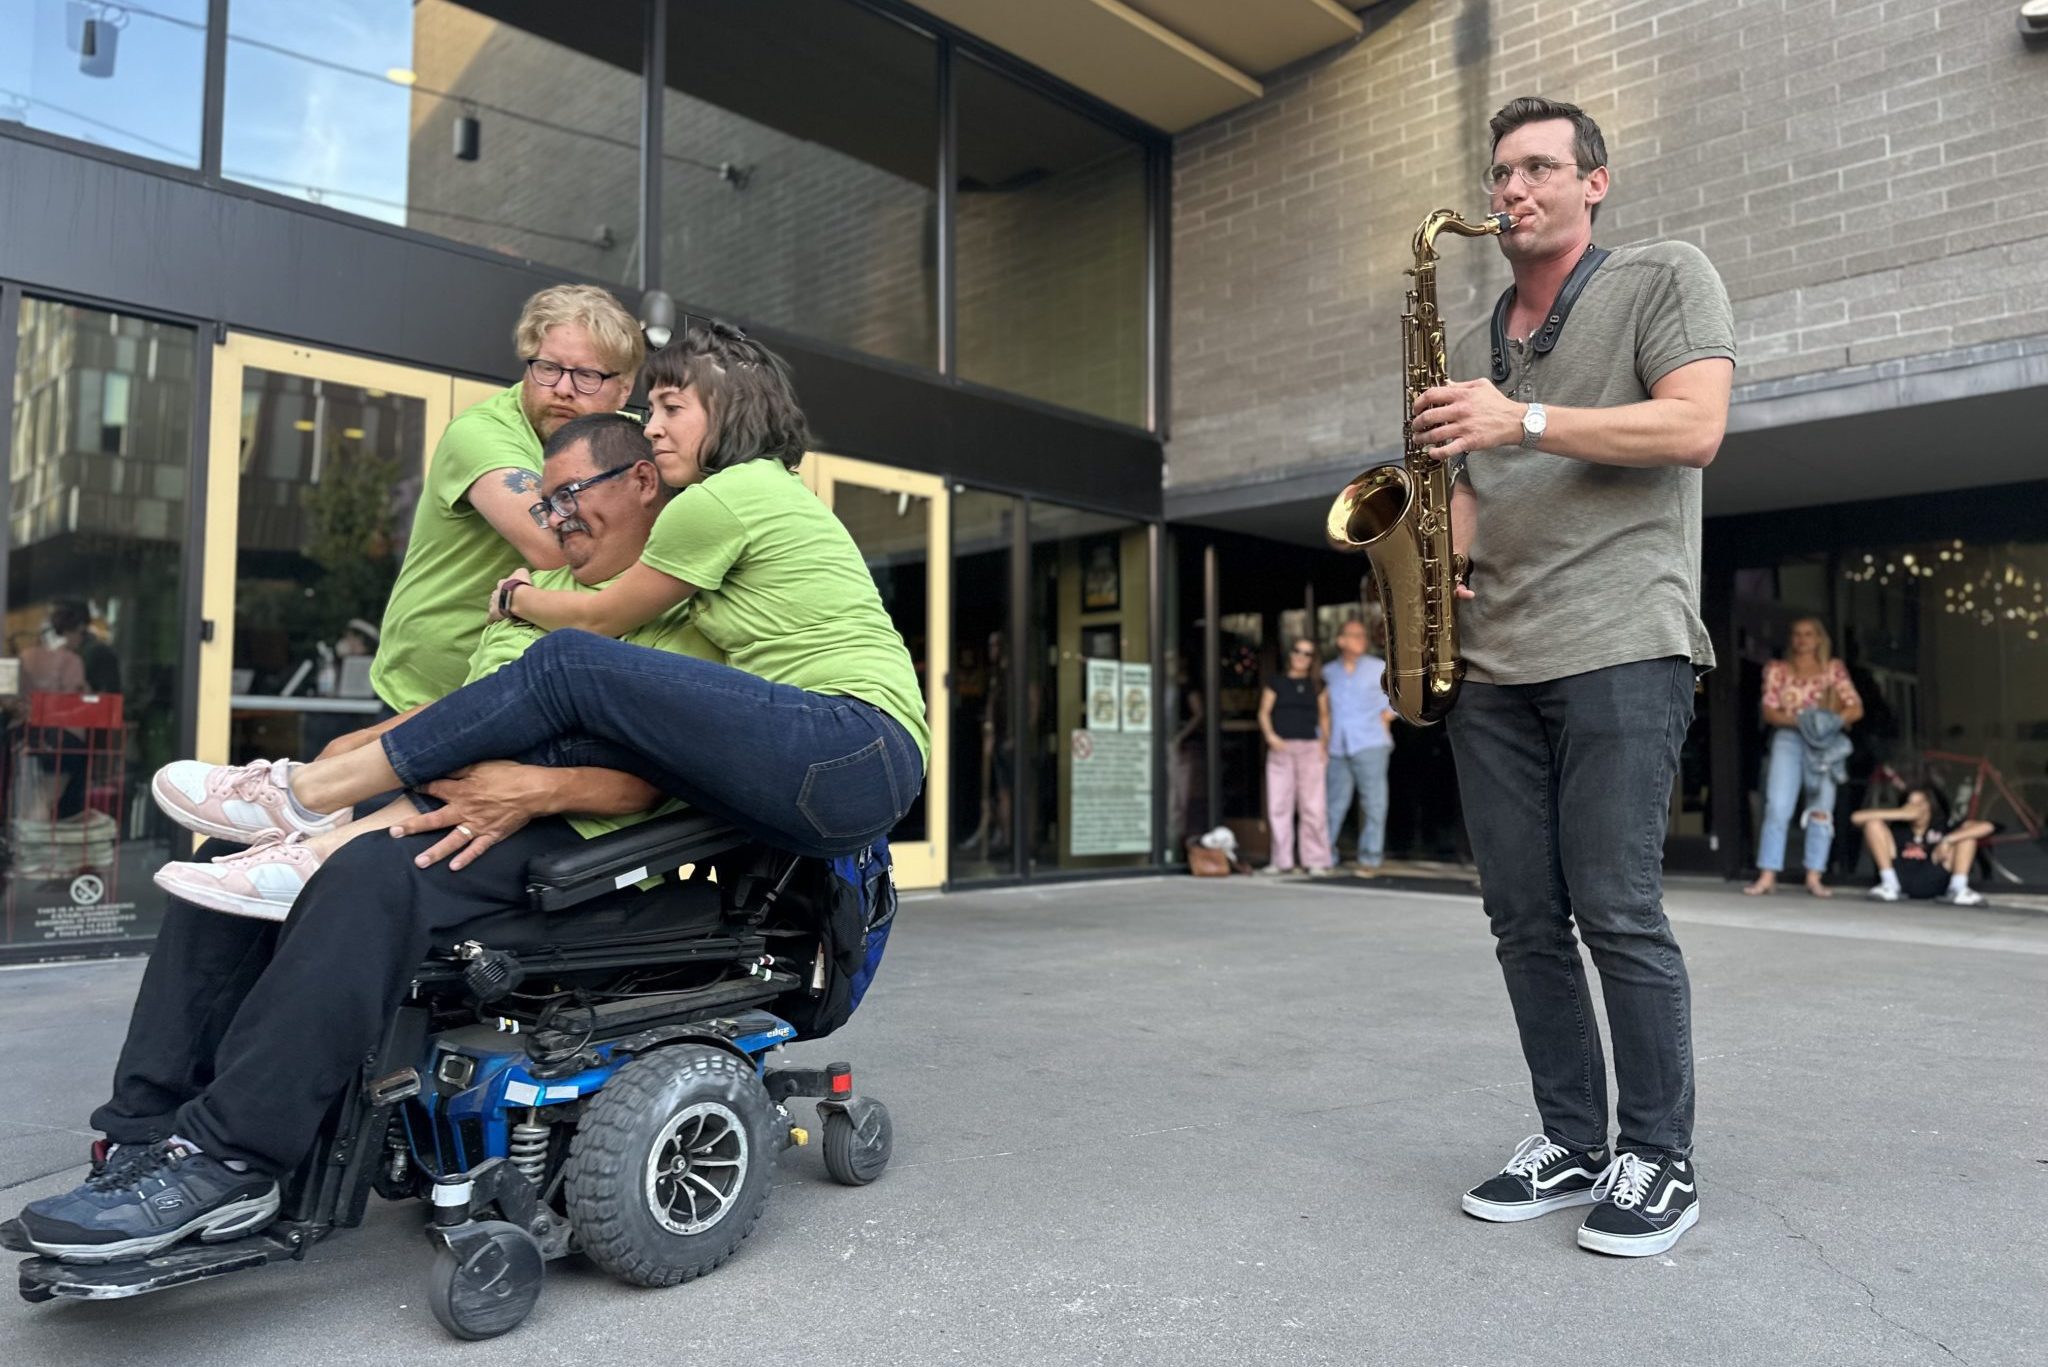 two stand-up dancers and one sit-down dancer perform with a person playing a saxophone outside. The two stand-up dancers hug the sit-down dancer and rest on their wheelchair.